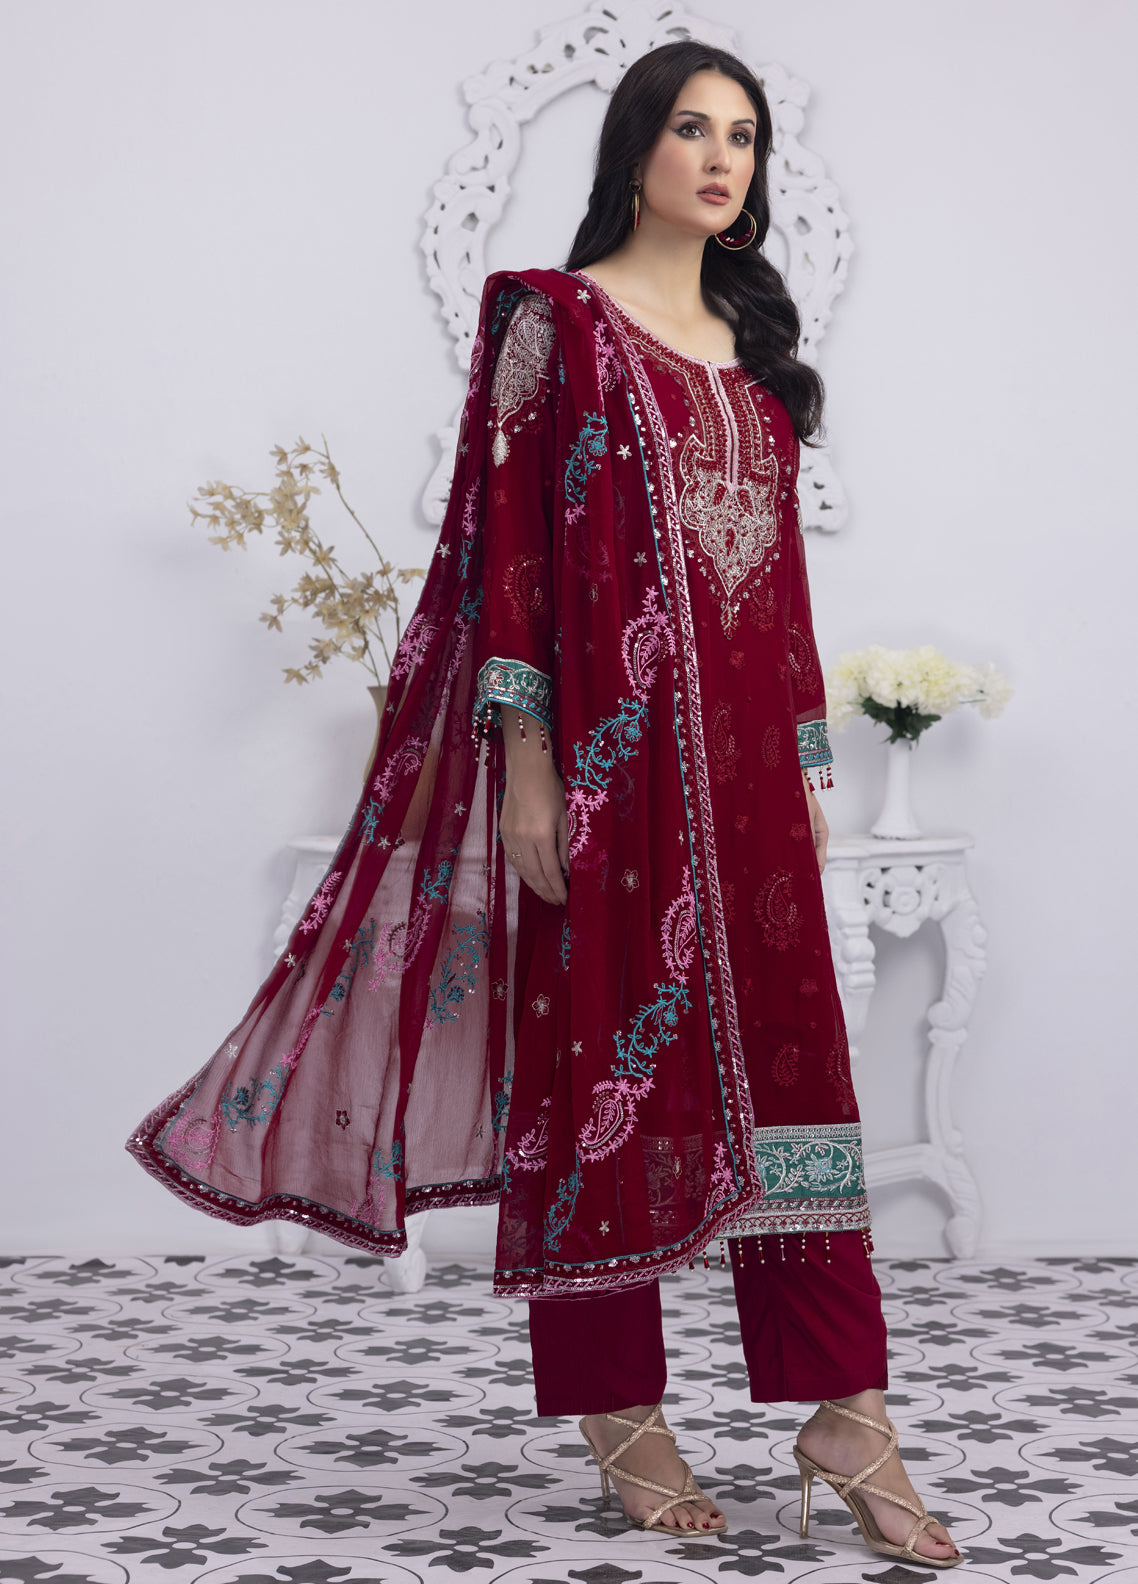 Mansoob By Polawn Embroidered Stitched 3 Piece Chiffon Suit PD-23-101 Ready to Wear